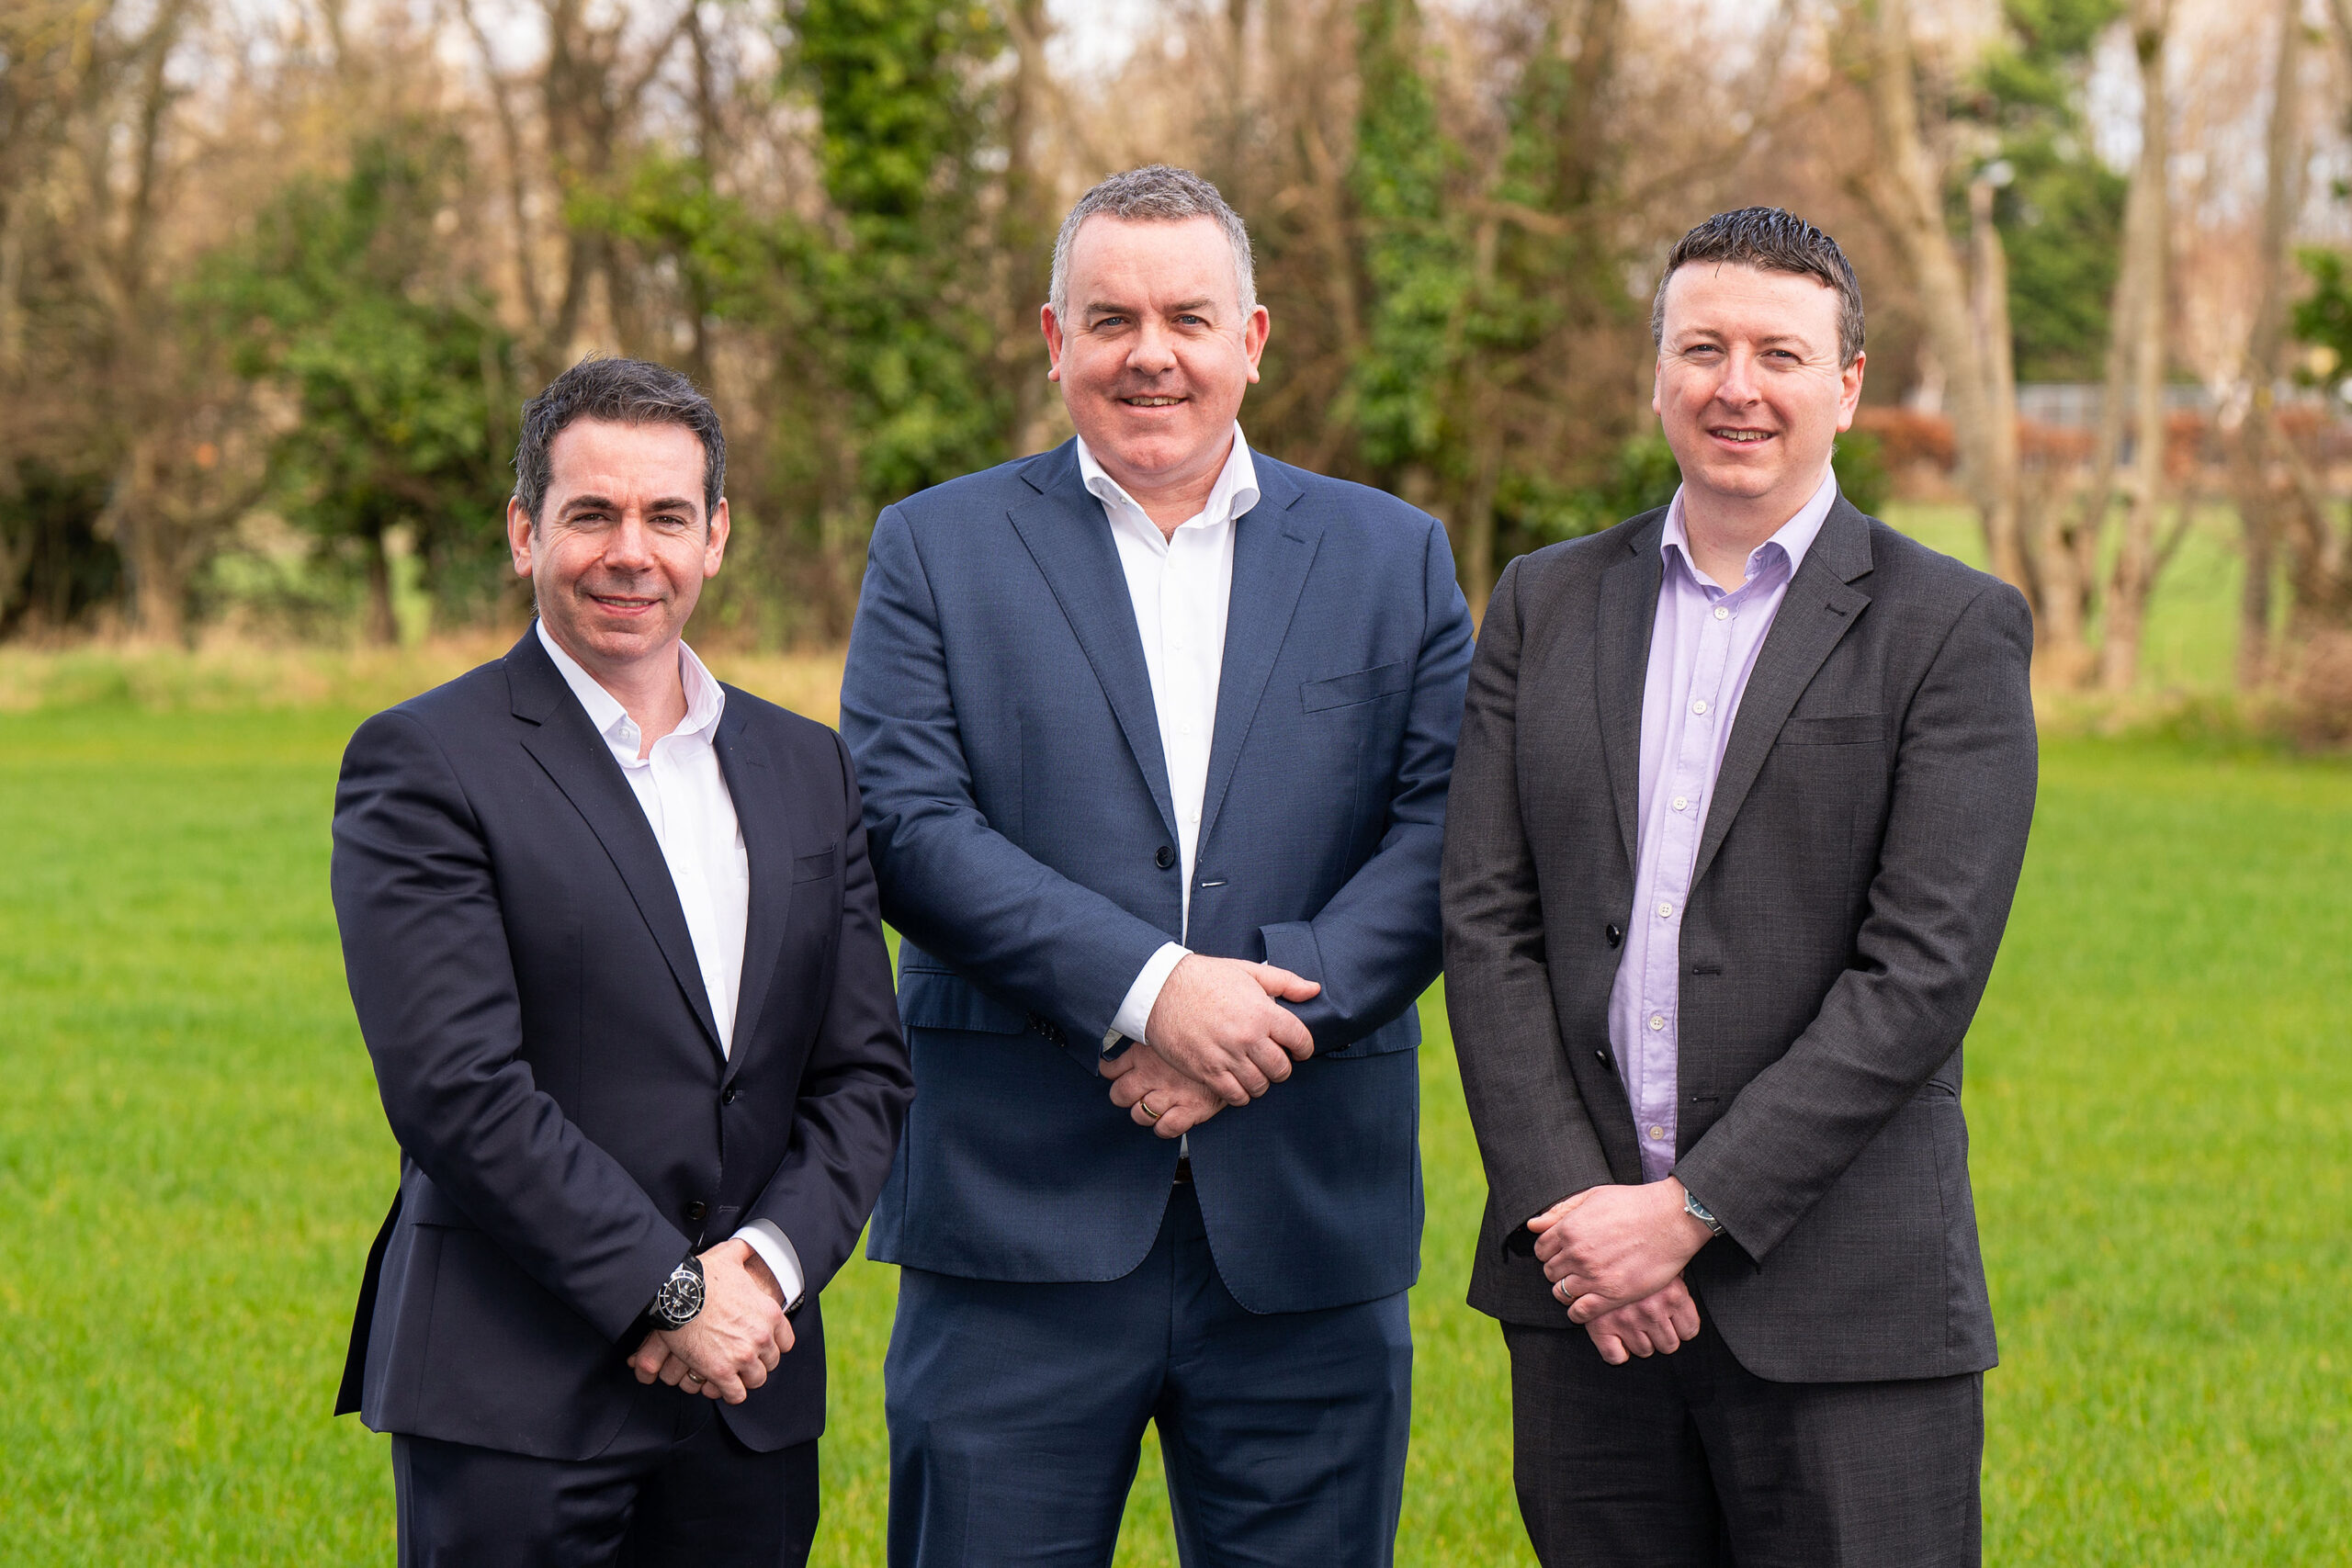 Pictured is Michael Murray, Director – Power & Renewables and Group Business Development, Henry McCann, Group Operations Director, and Stephen Kavanagh, Associate Director and Business Unit Leader of Power & Renewables.